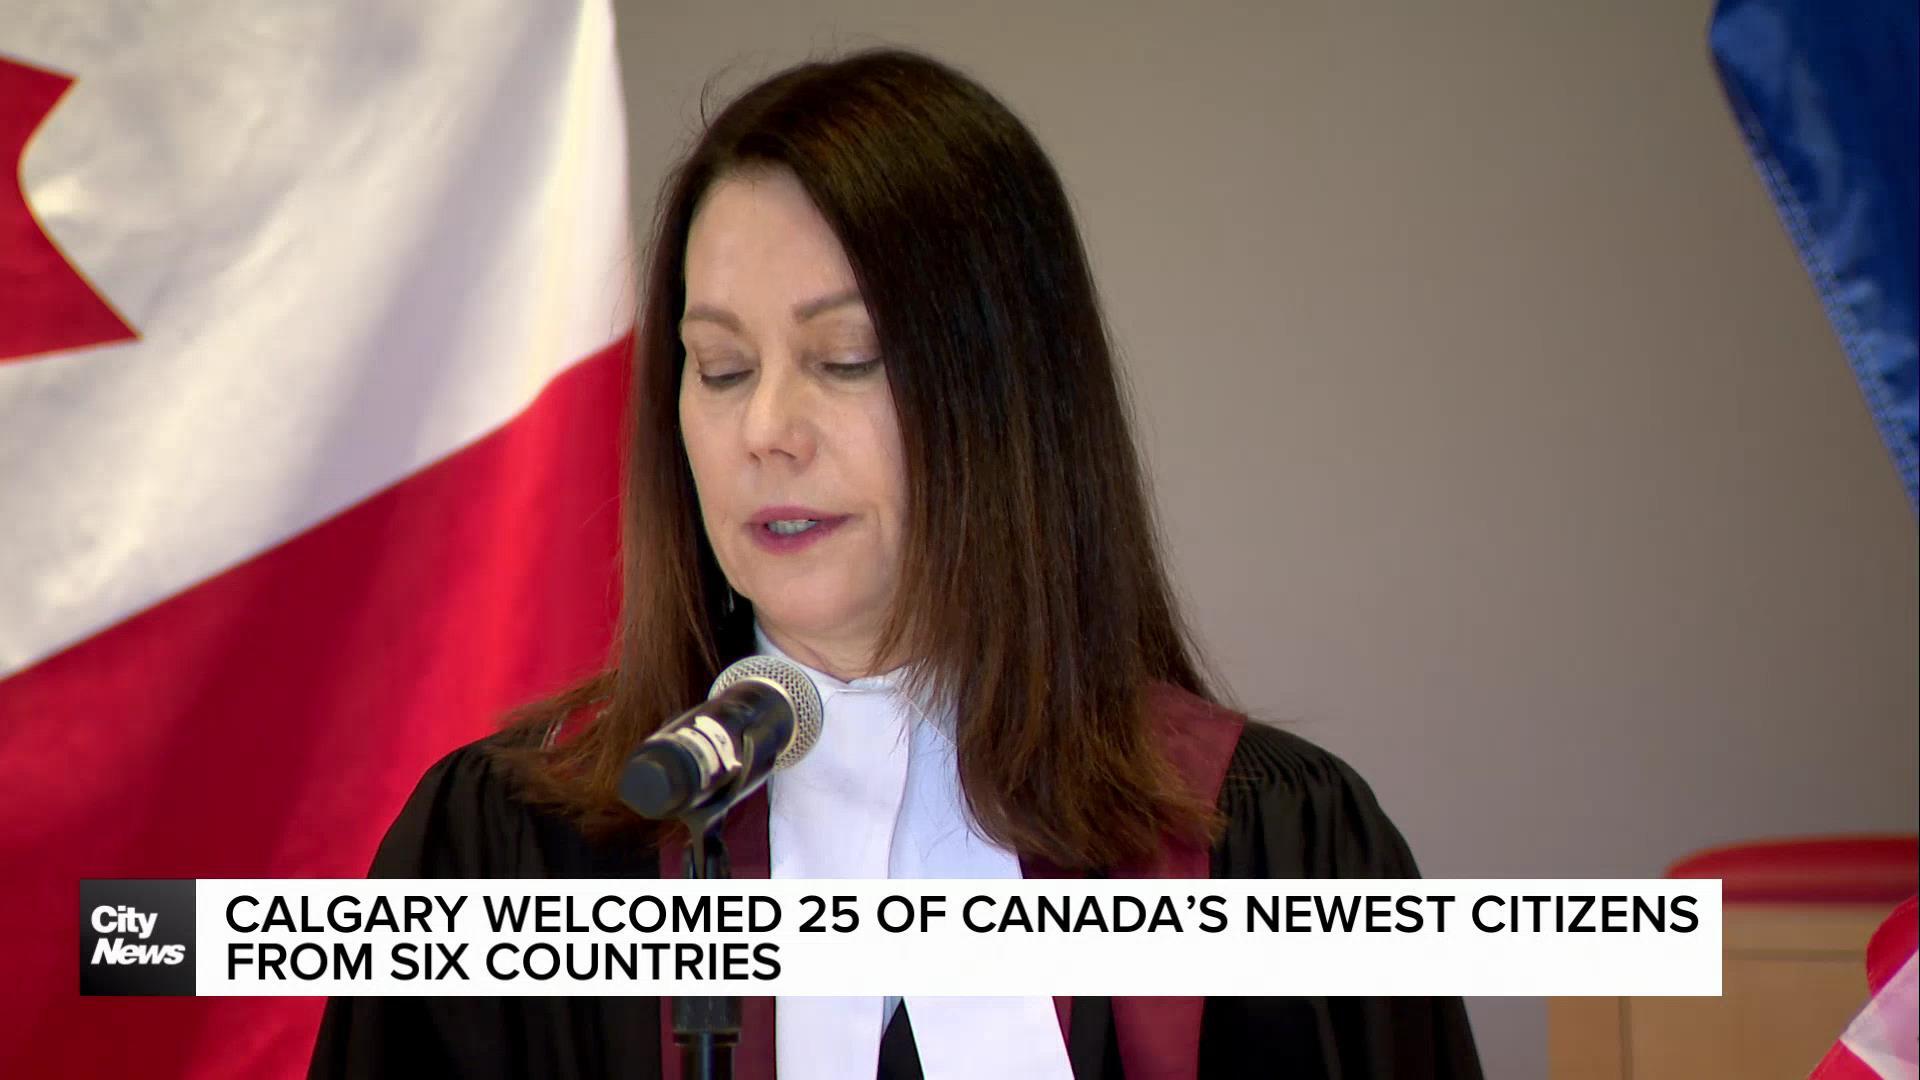 Calgary welcomed 25 of Canada’s newest citizens from six countries